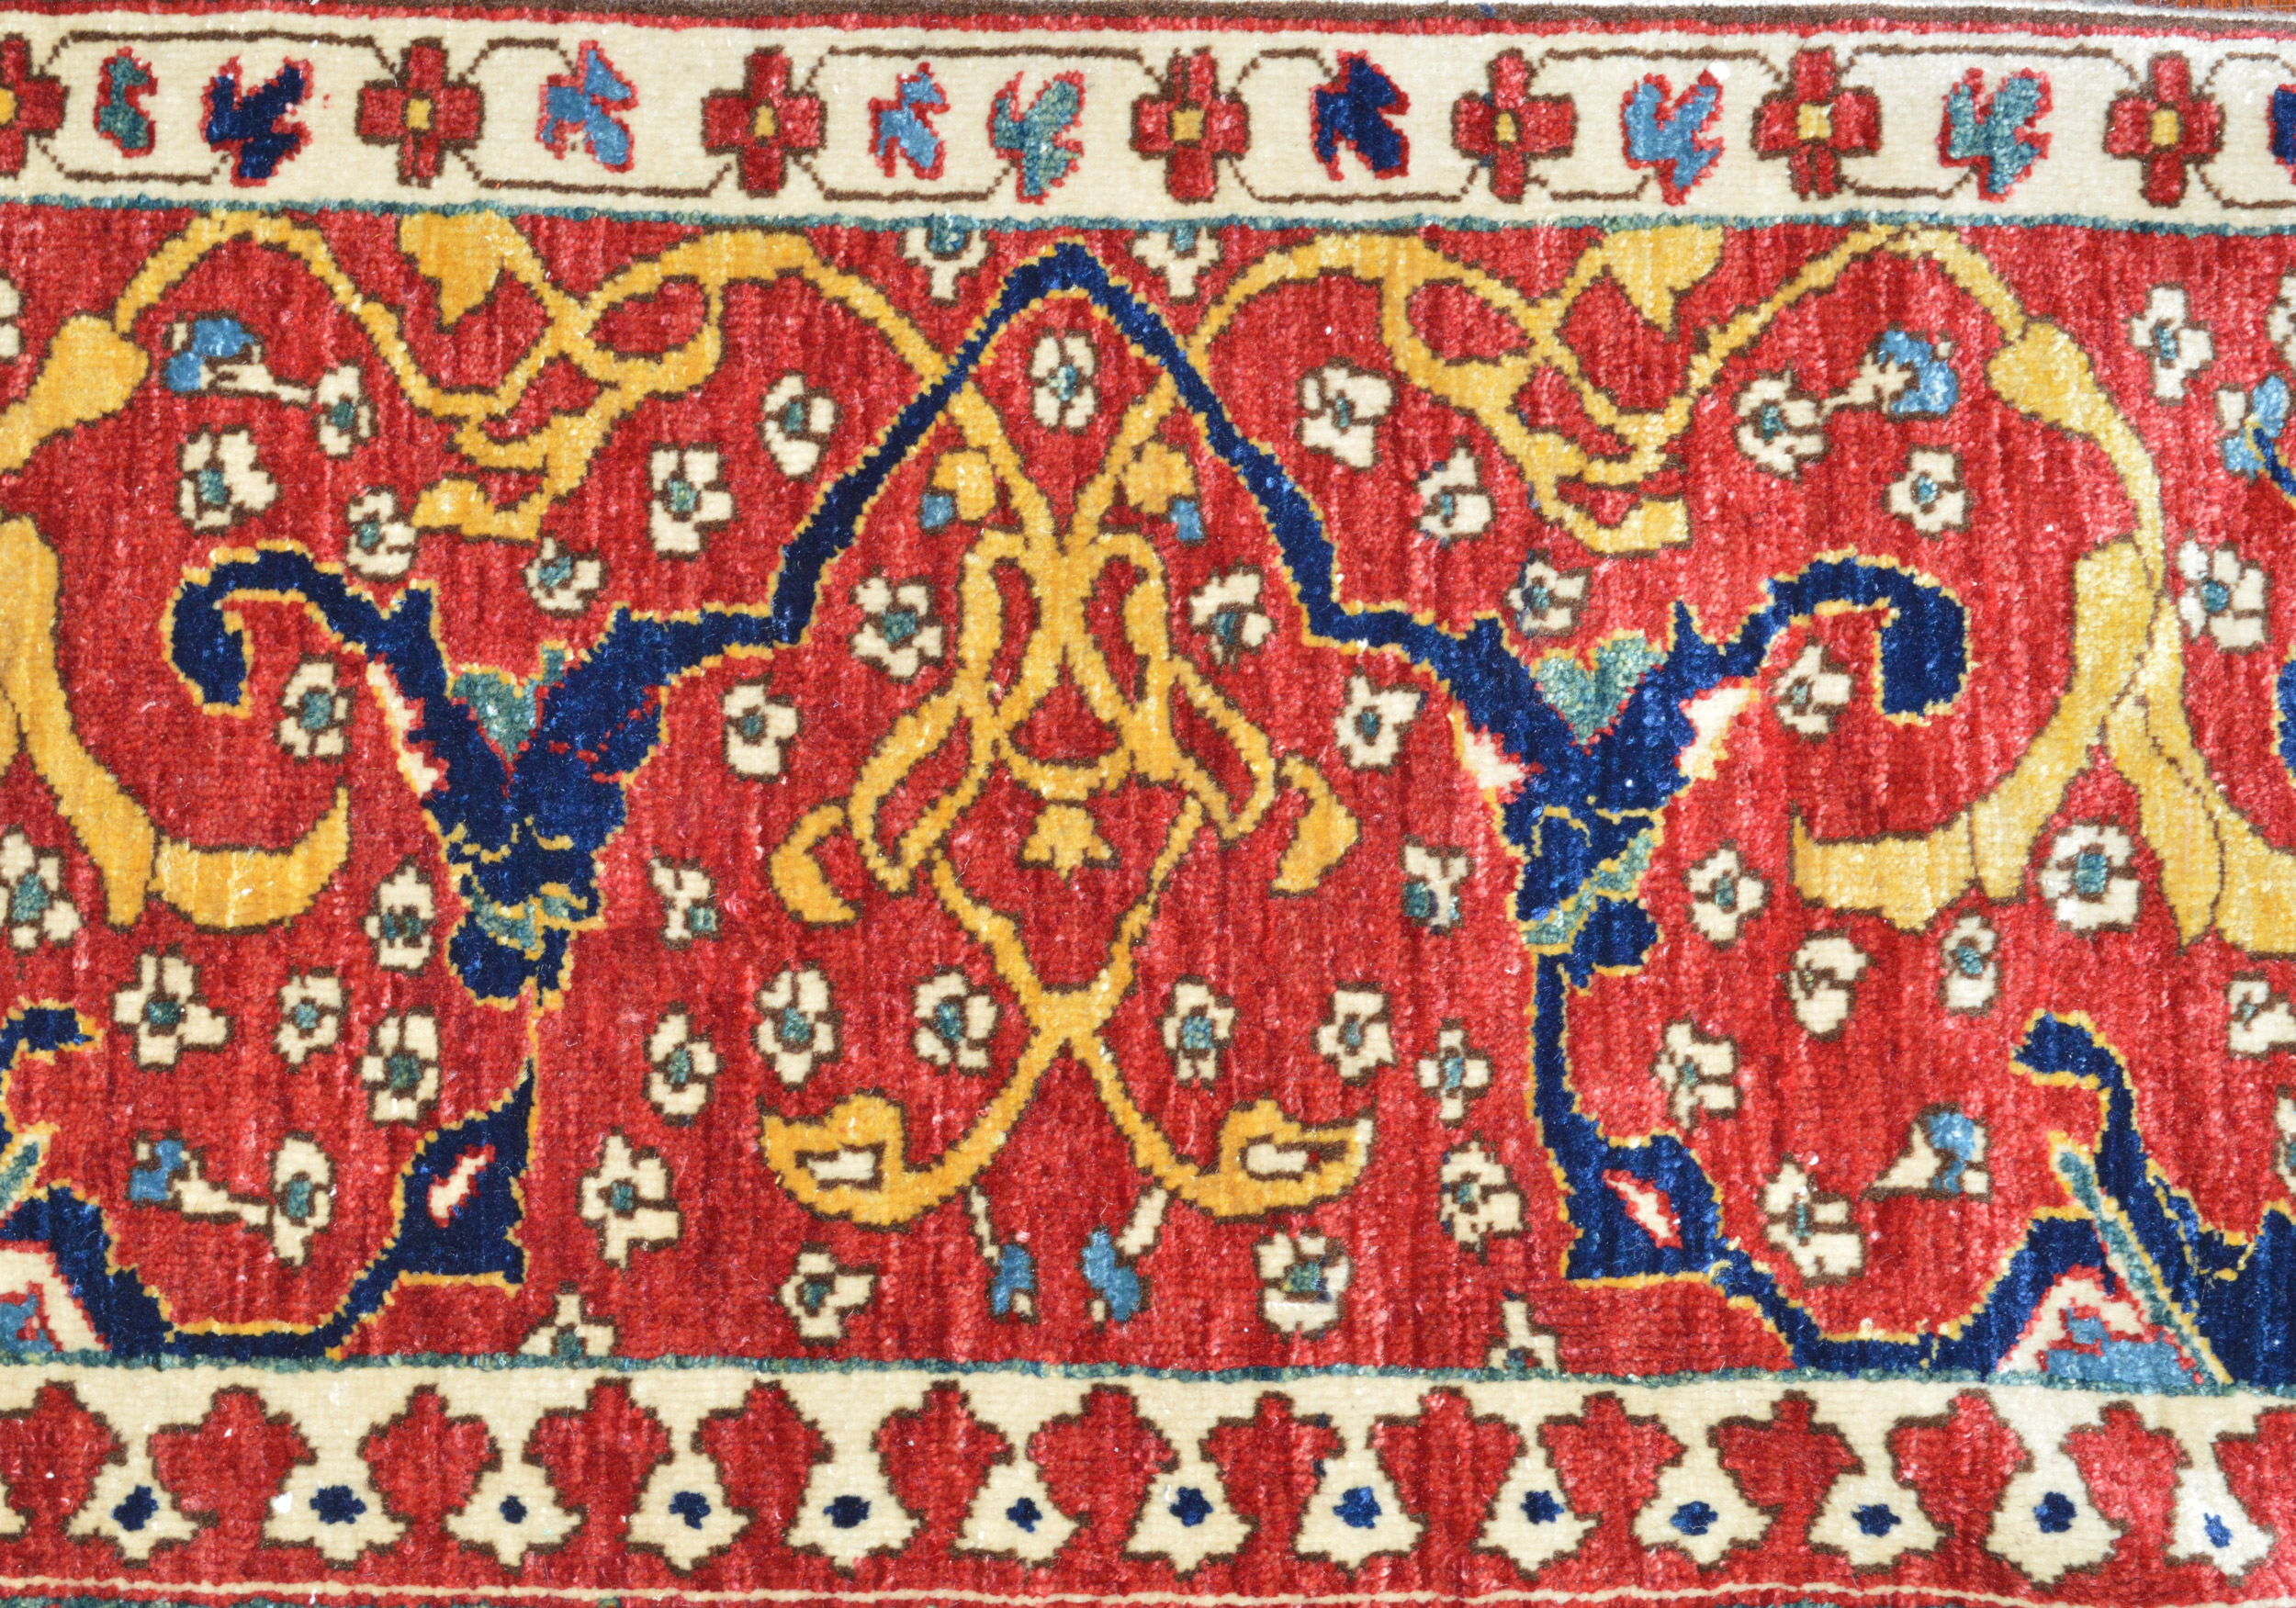 Detail of a red major border with a Reciprocal Trefoil minor border from a new, hand woven Arabesque design carpet from Azerbaijan - Douglas Stock Gallery, contemporary natural dye Oriental rugs Boston,Ma area South Natick,MA Oriental rugs